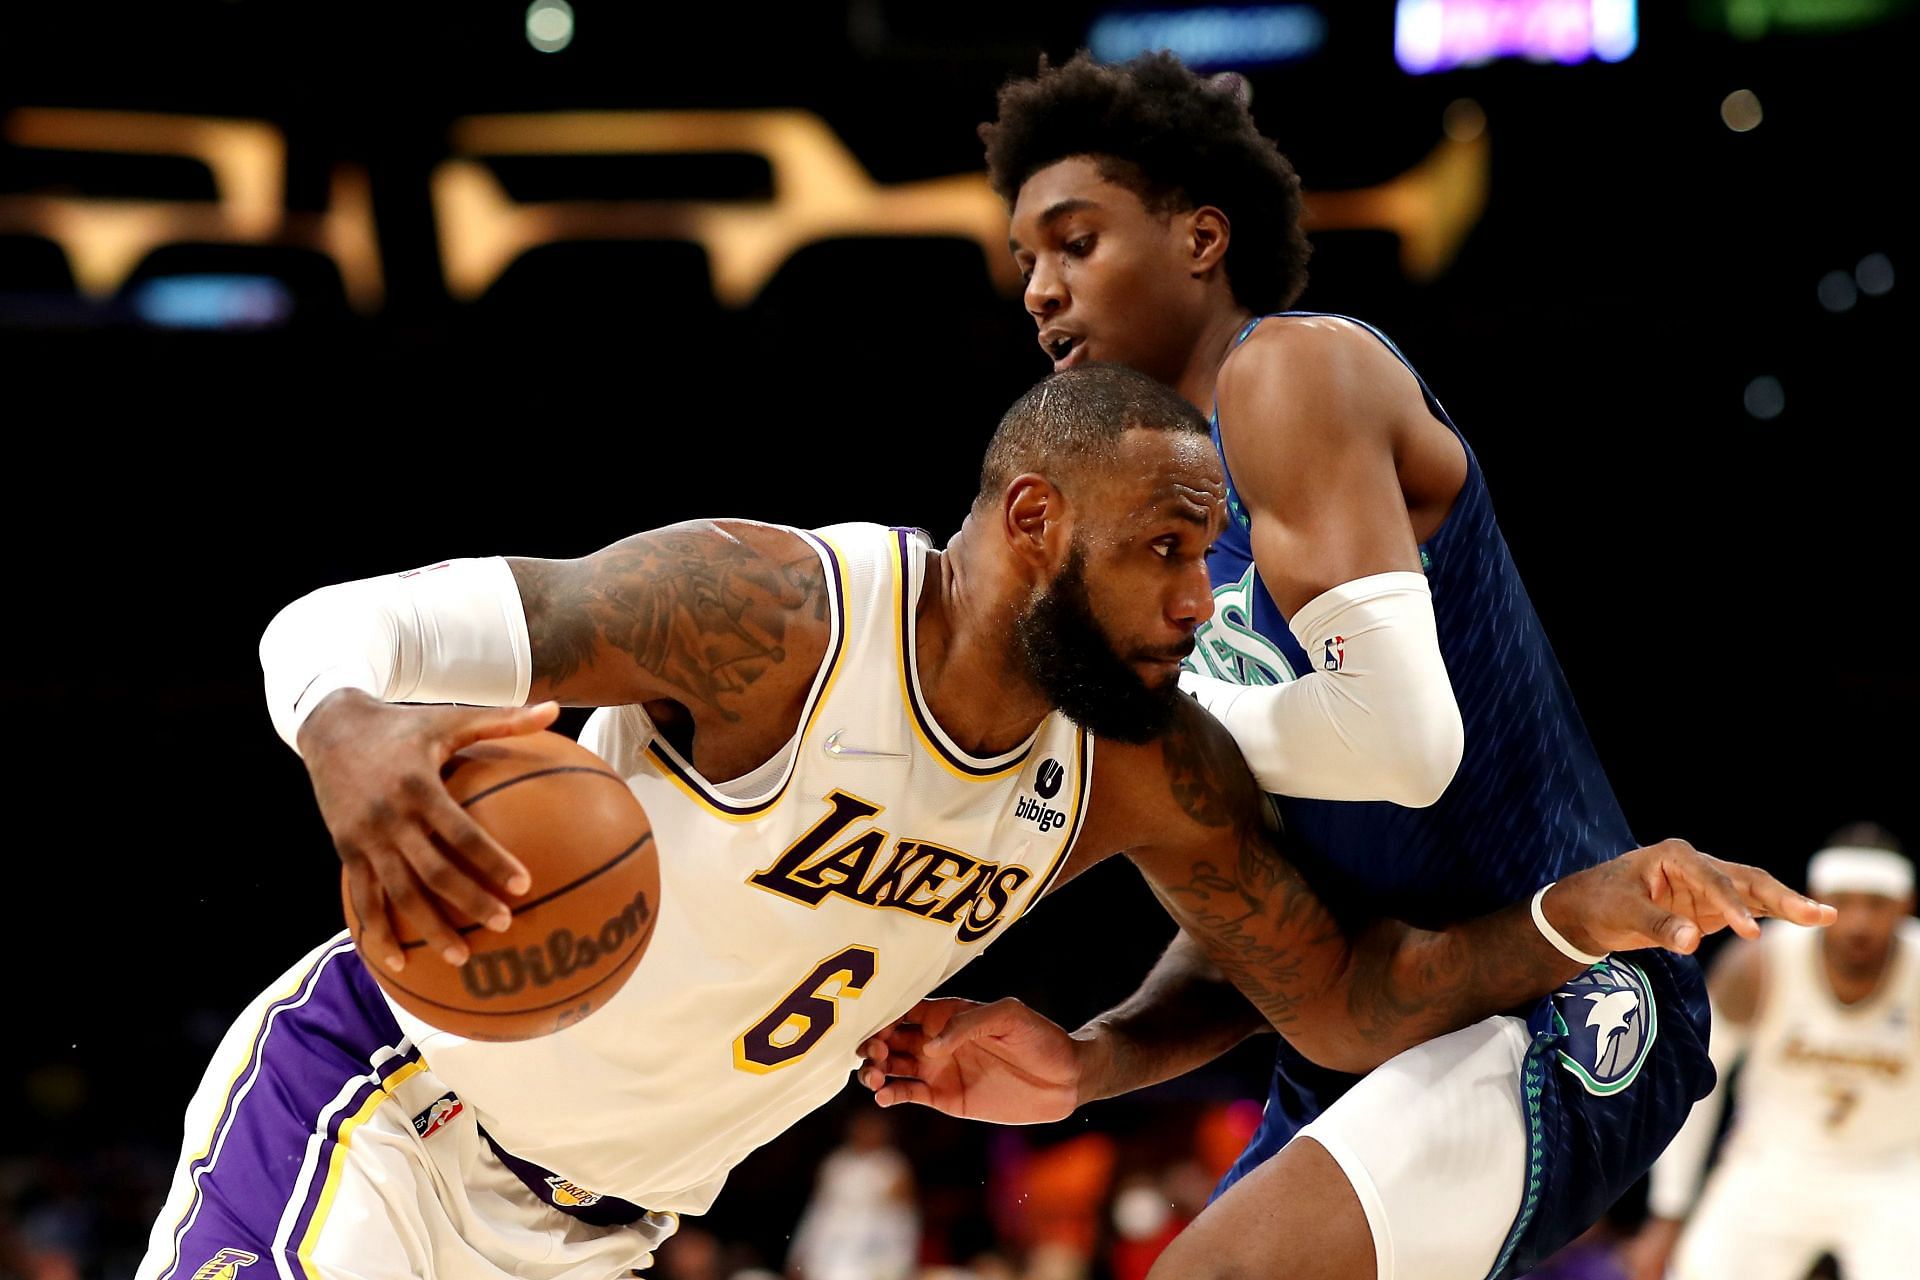 LeBron James of the Los Angeles Lakers drives against the Minnesota Timberwolves